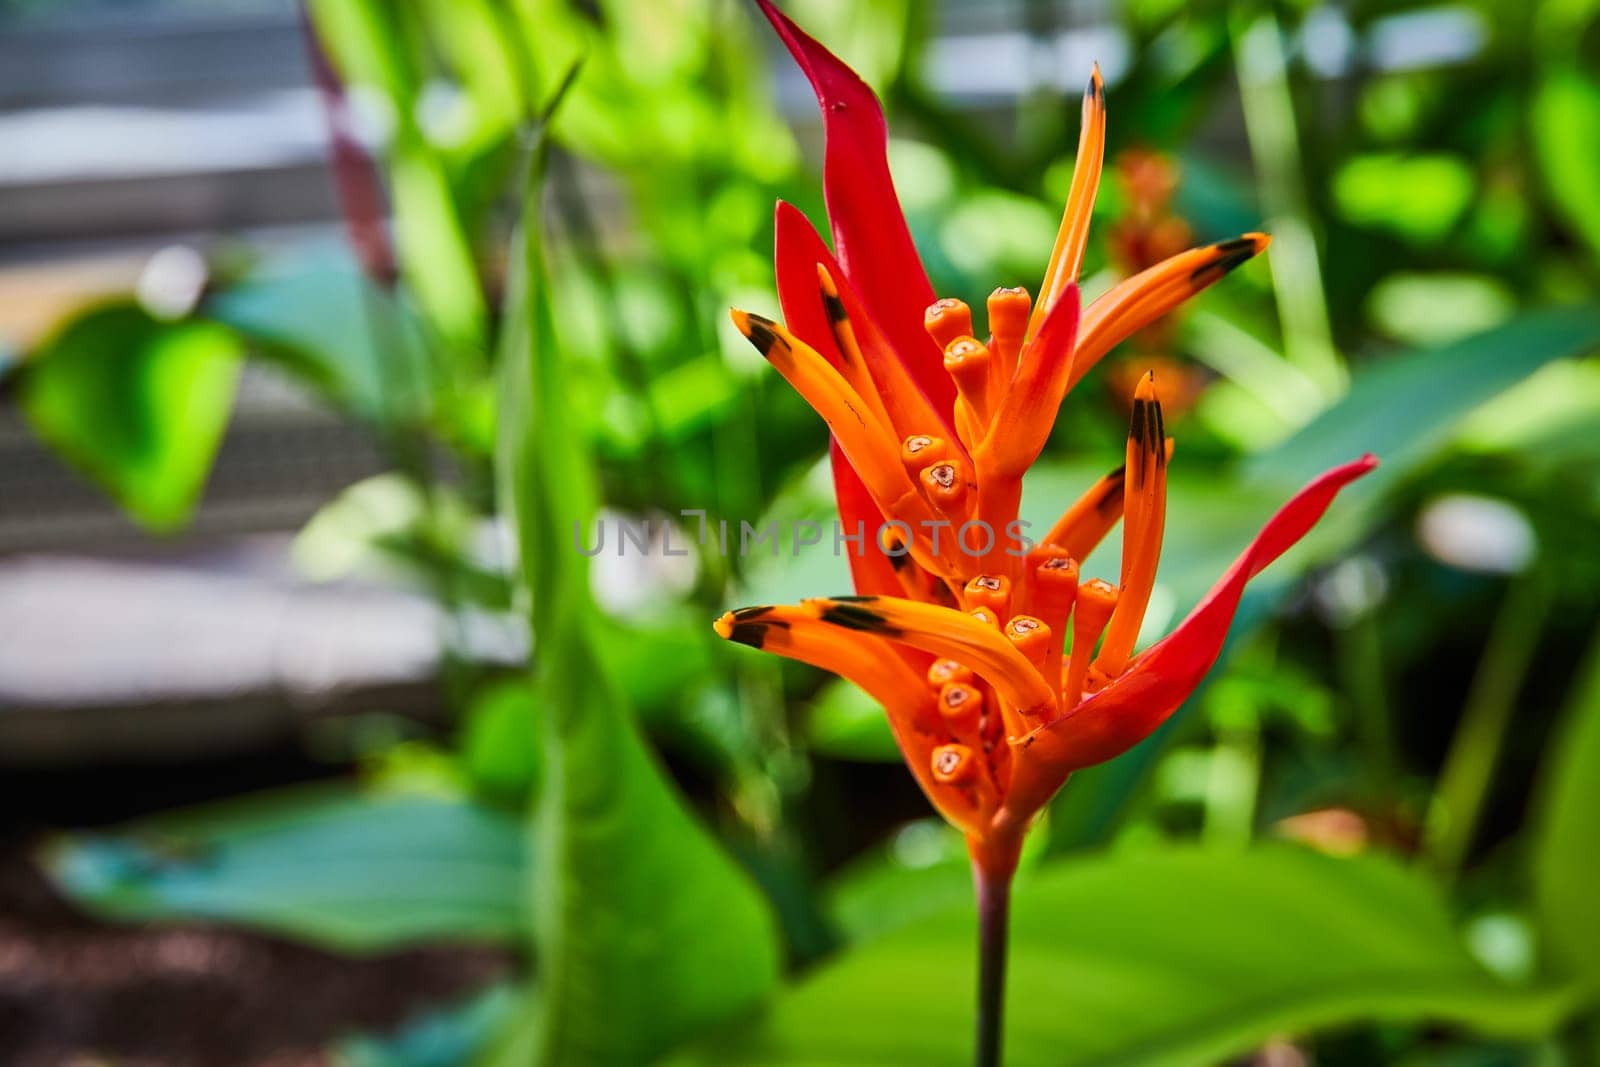 Vibrant Orange Heliconia with Water Droplets, Green Foliage Background by njproductions